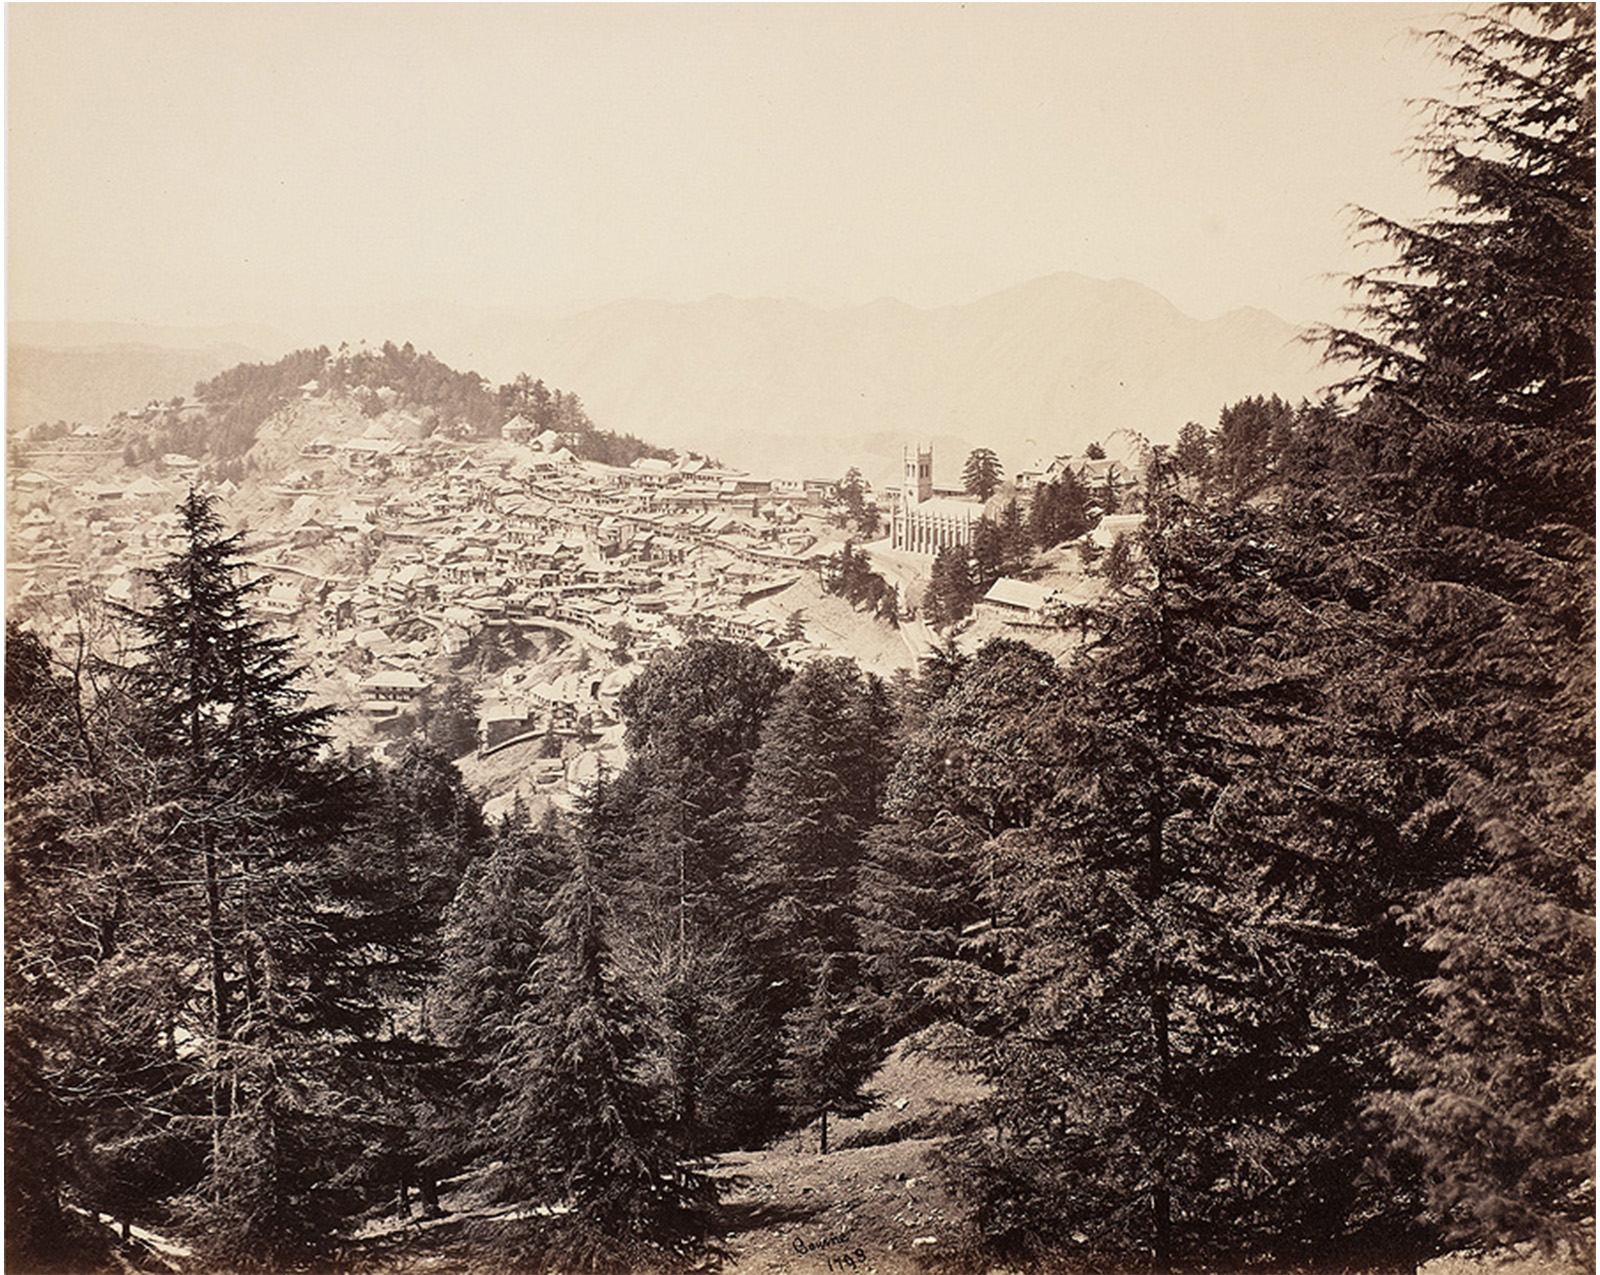 black and white image. foreground: large pine trees along a mountainside. background: a sprawling town with buildings on mountains, another mountain in the distant background